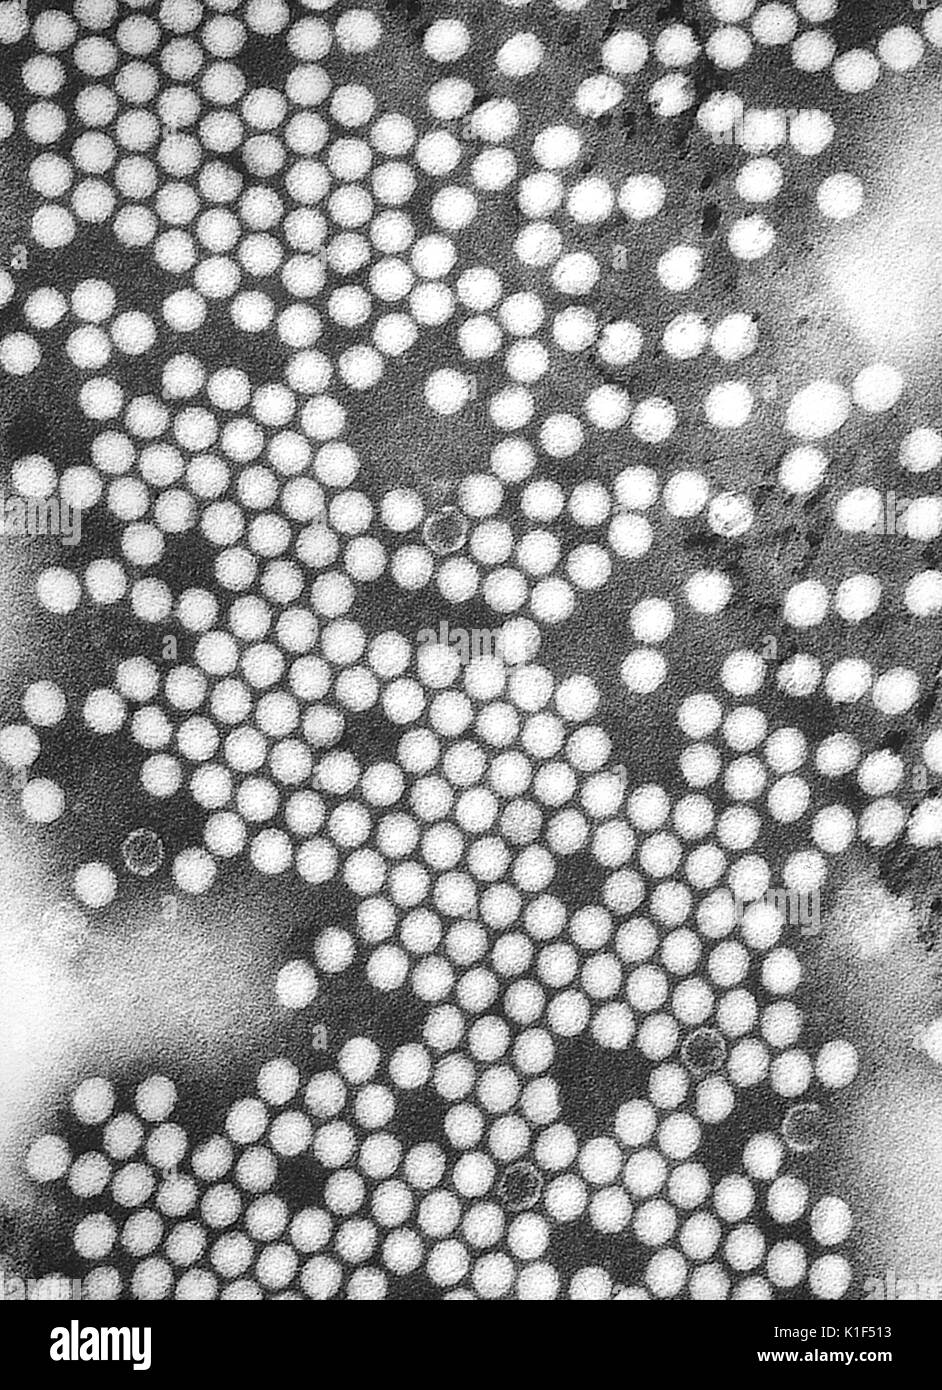 Electron micrograph of the poliovirus. Poliovirus is a species of Enterovirus, which is a Genus in the family of Picornaviridae, and is an RNA virus. Image courtesy CDC/Dr. Fred Murphy, Sylvia Whitfield, 1975. Stock Photo